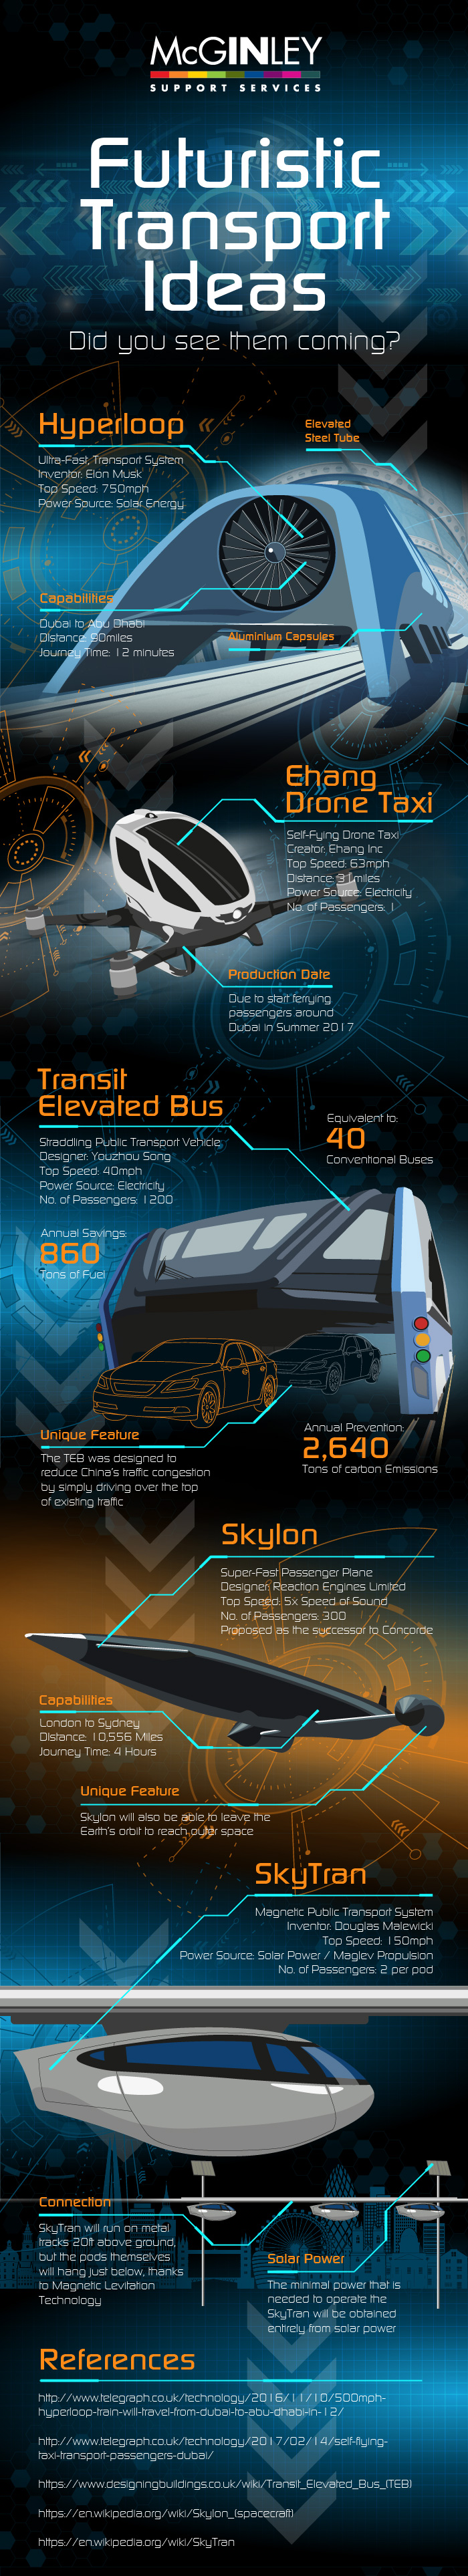 Futuristic Transport Ideas by McGinley Support Services